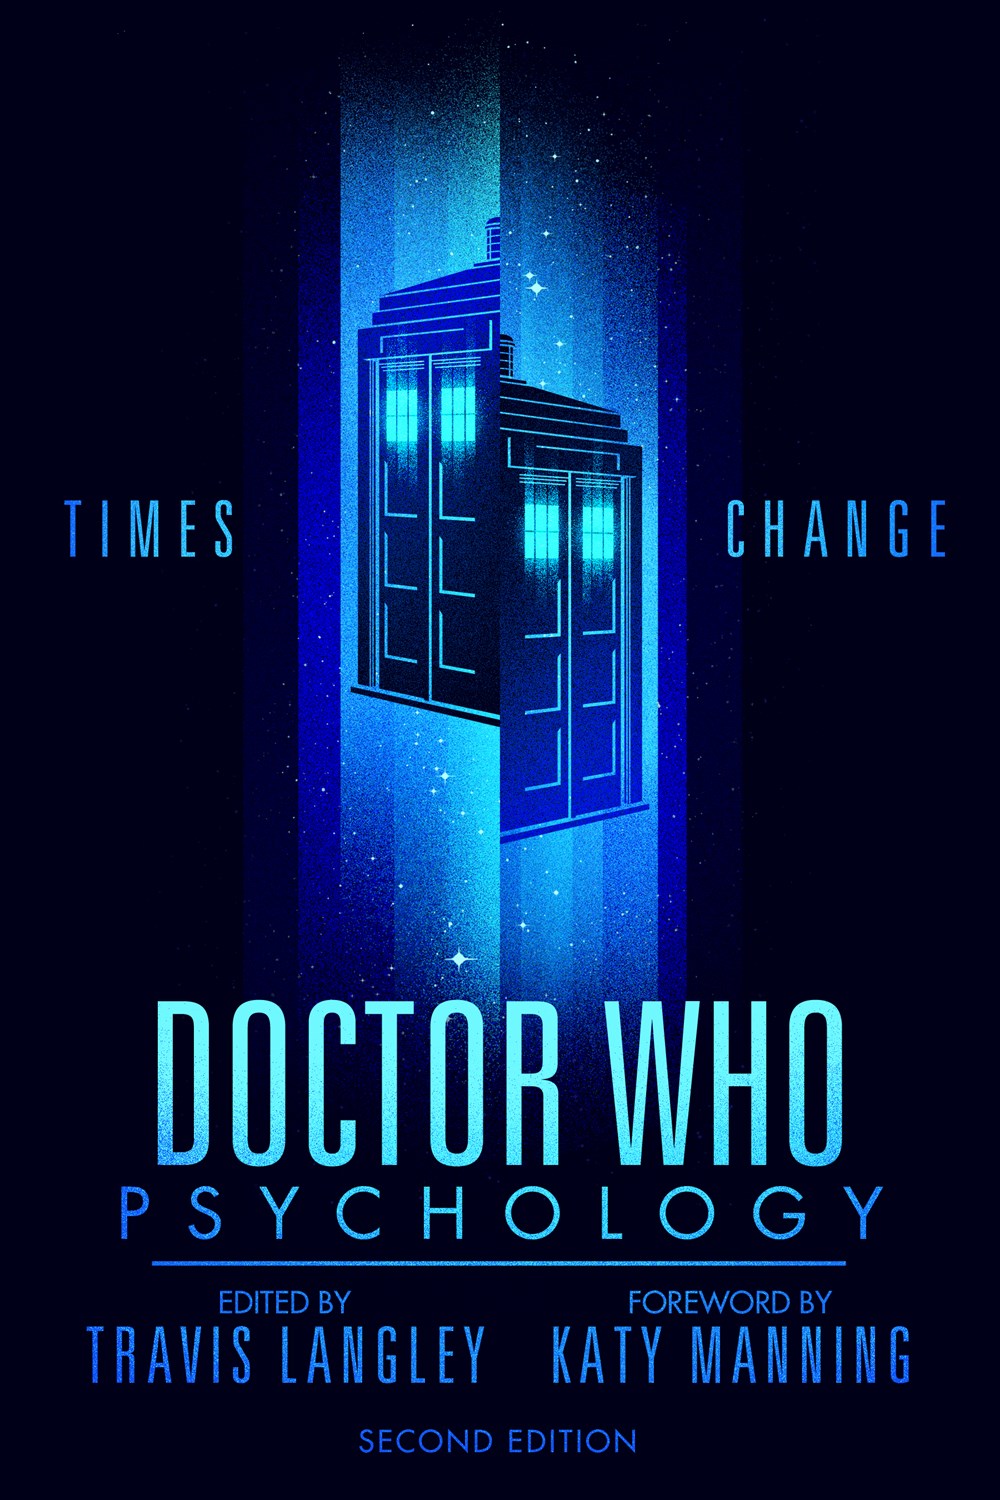 Doctor Who Psychology: Times Change, Second Ed